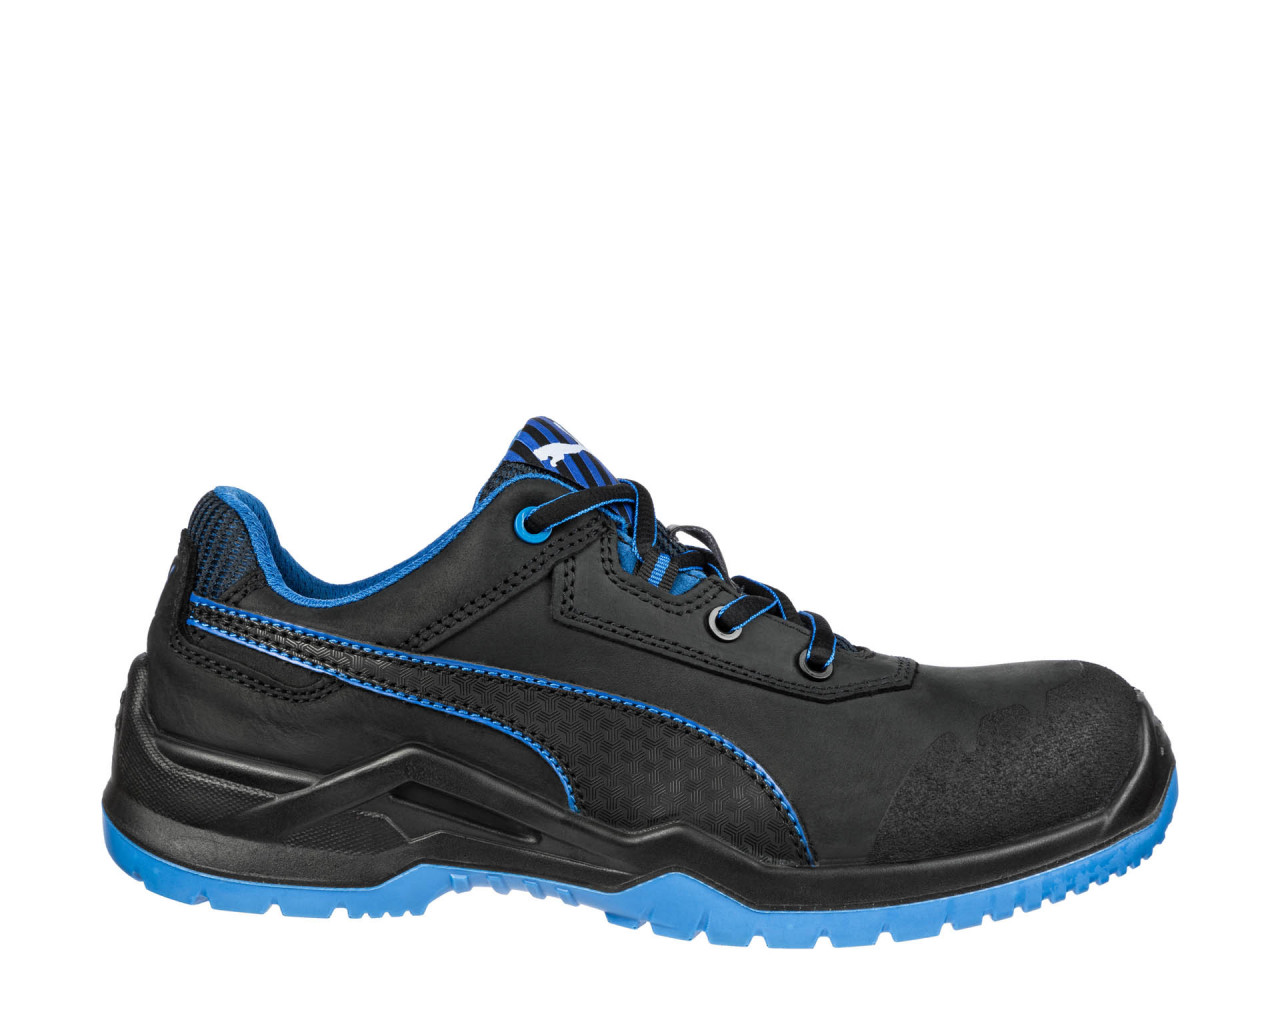 PUMA SAFETY safety shoes S3 ESD SRC ARGON BLUE LOW | Puma Safety English